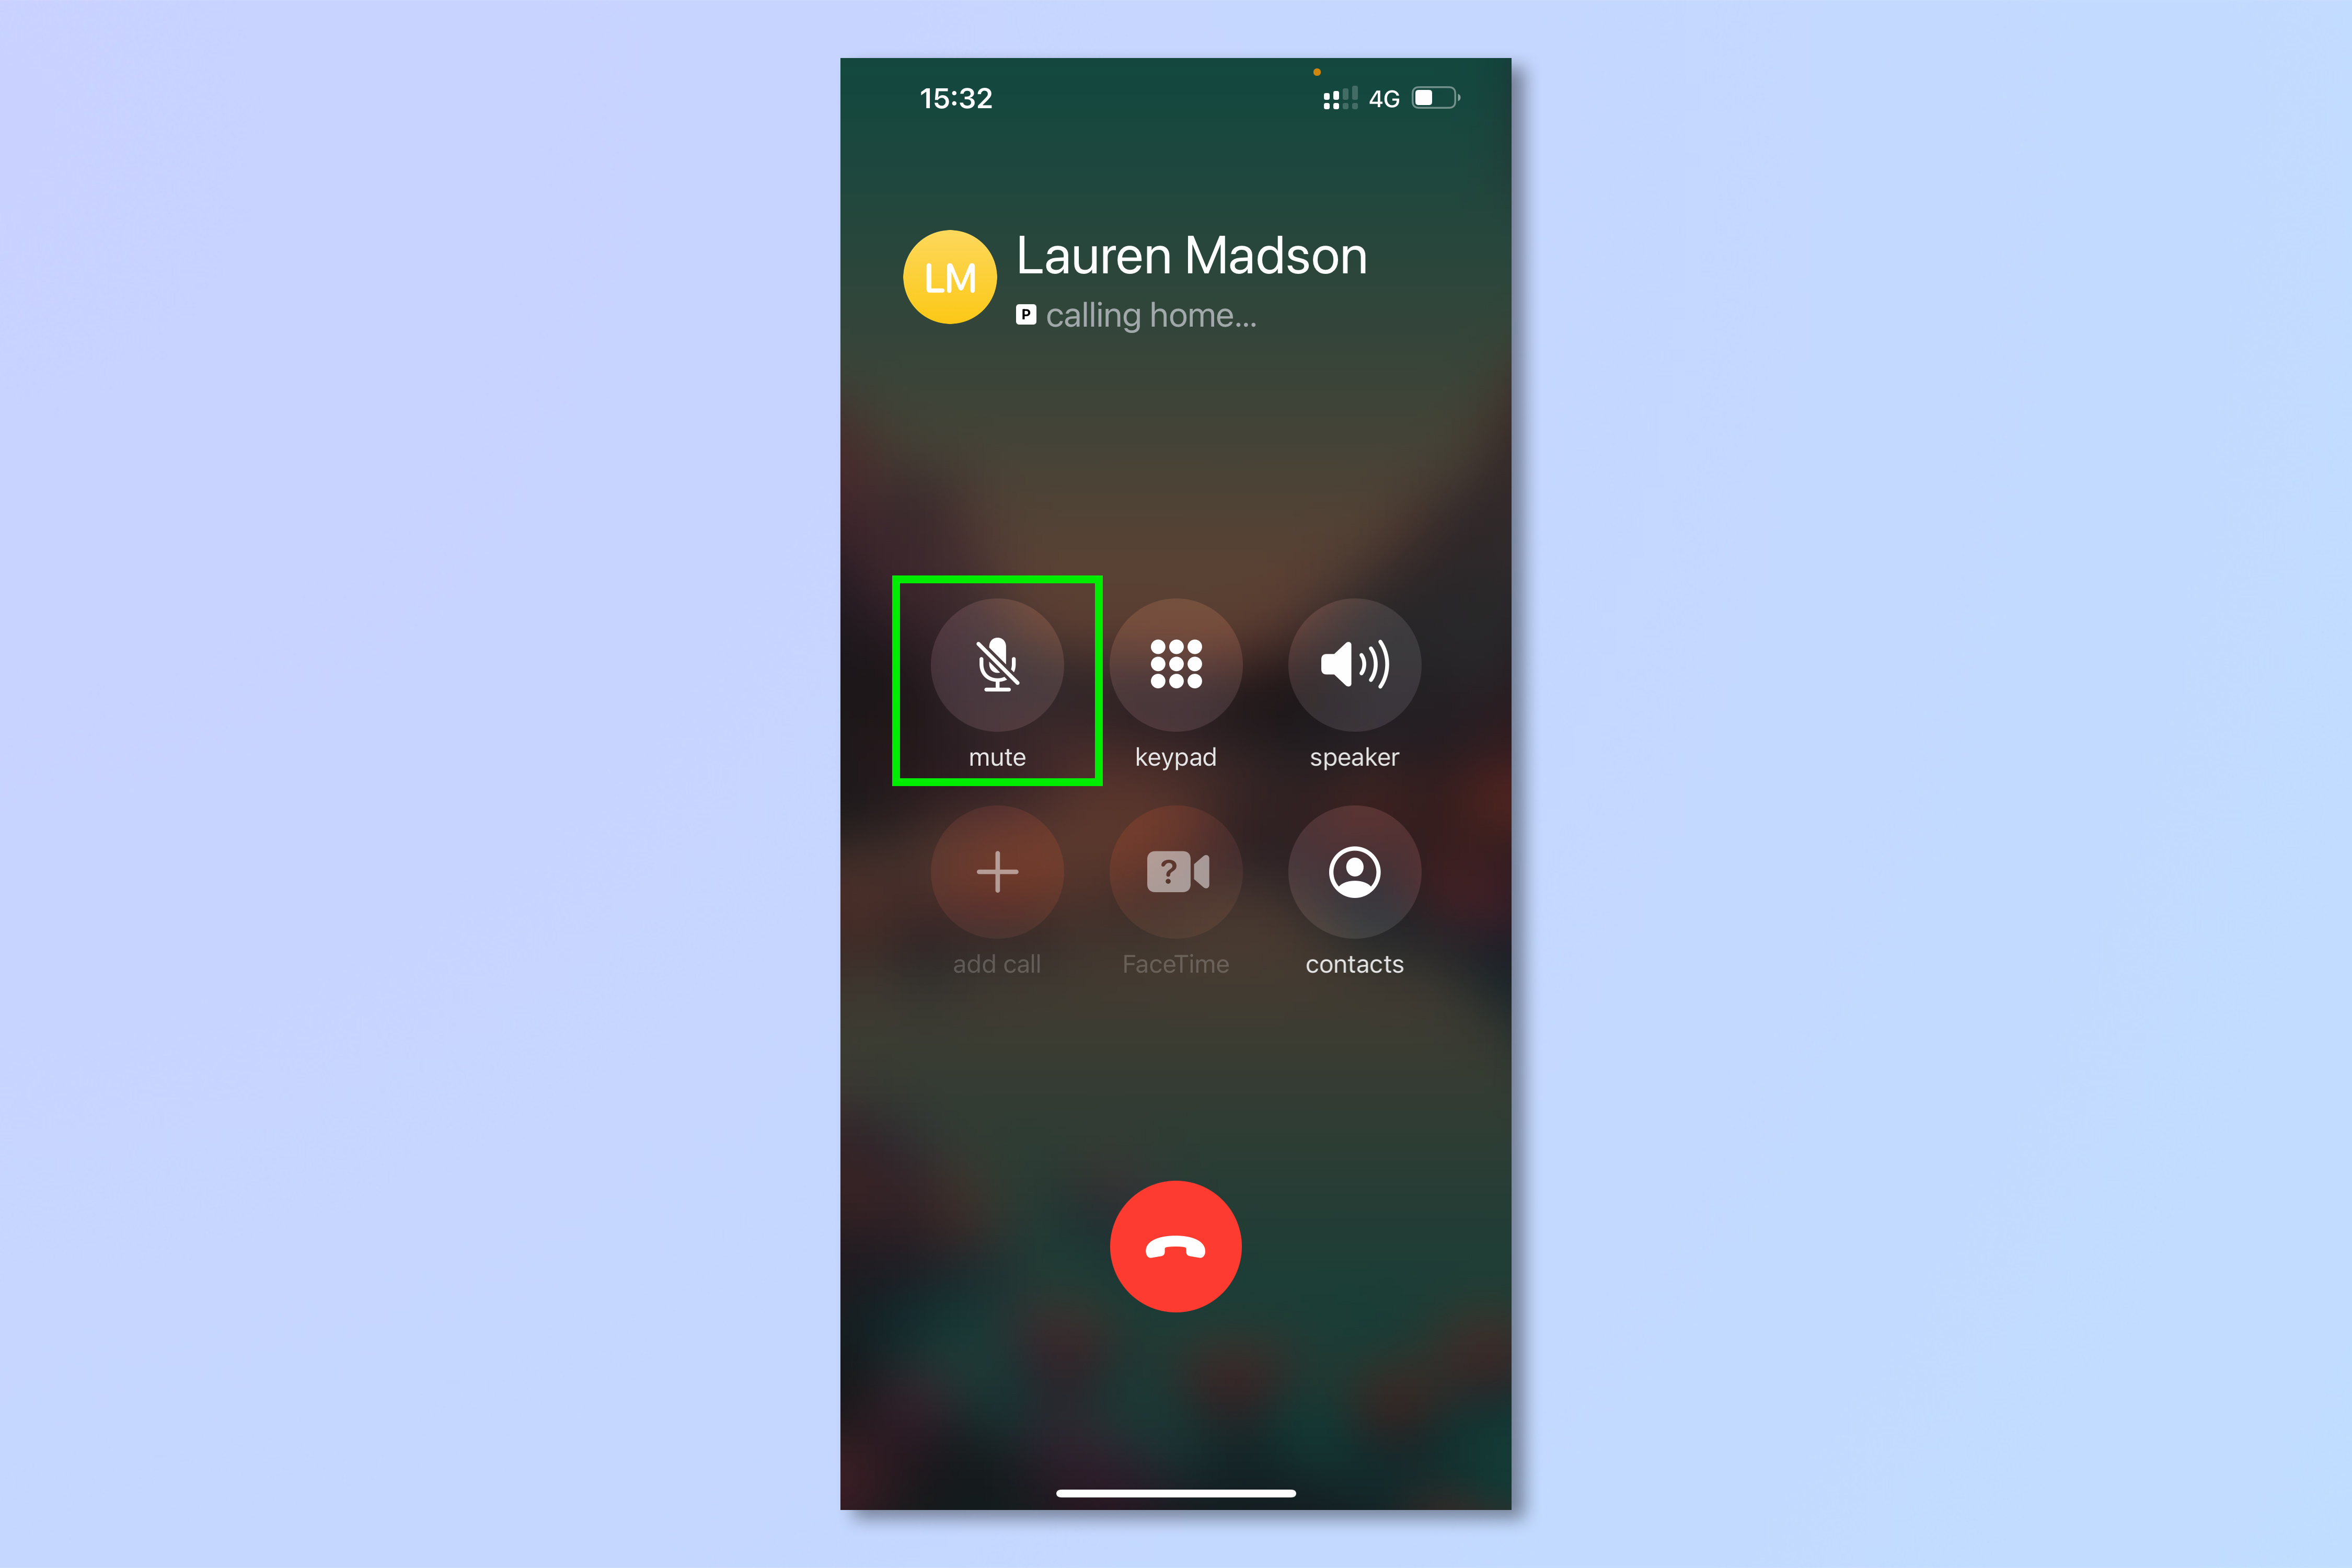 Screenshots showing how to put someone on hold on an iPhone